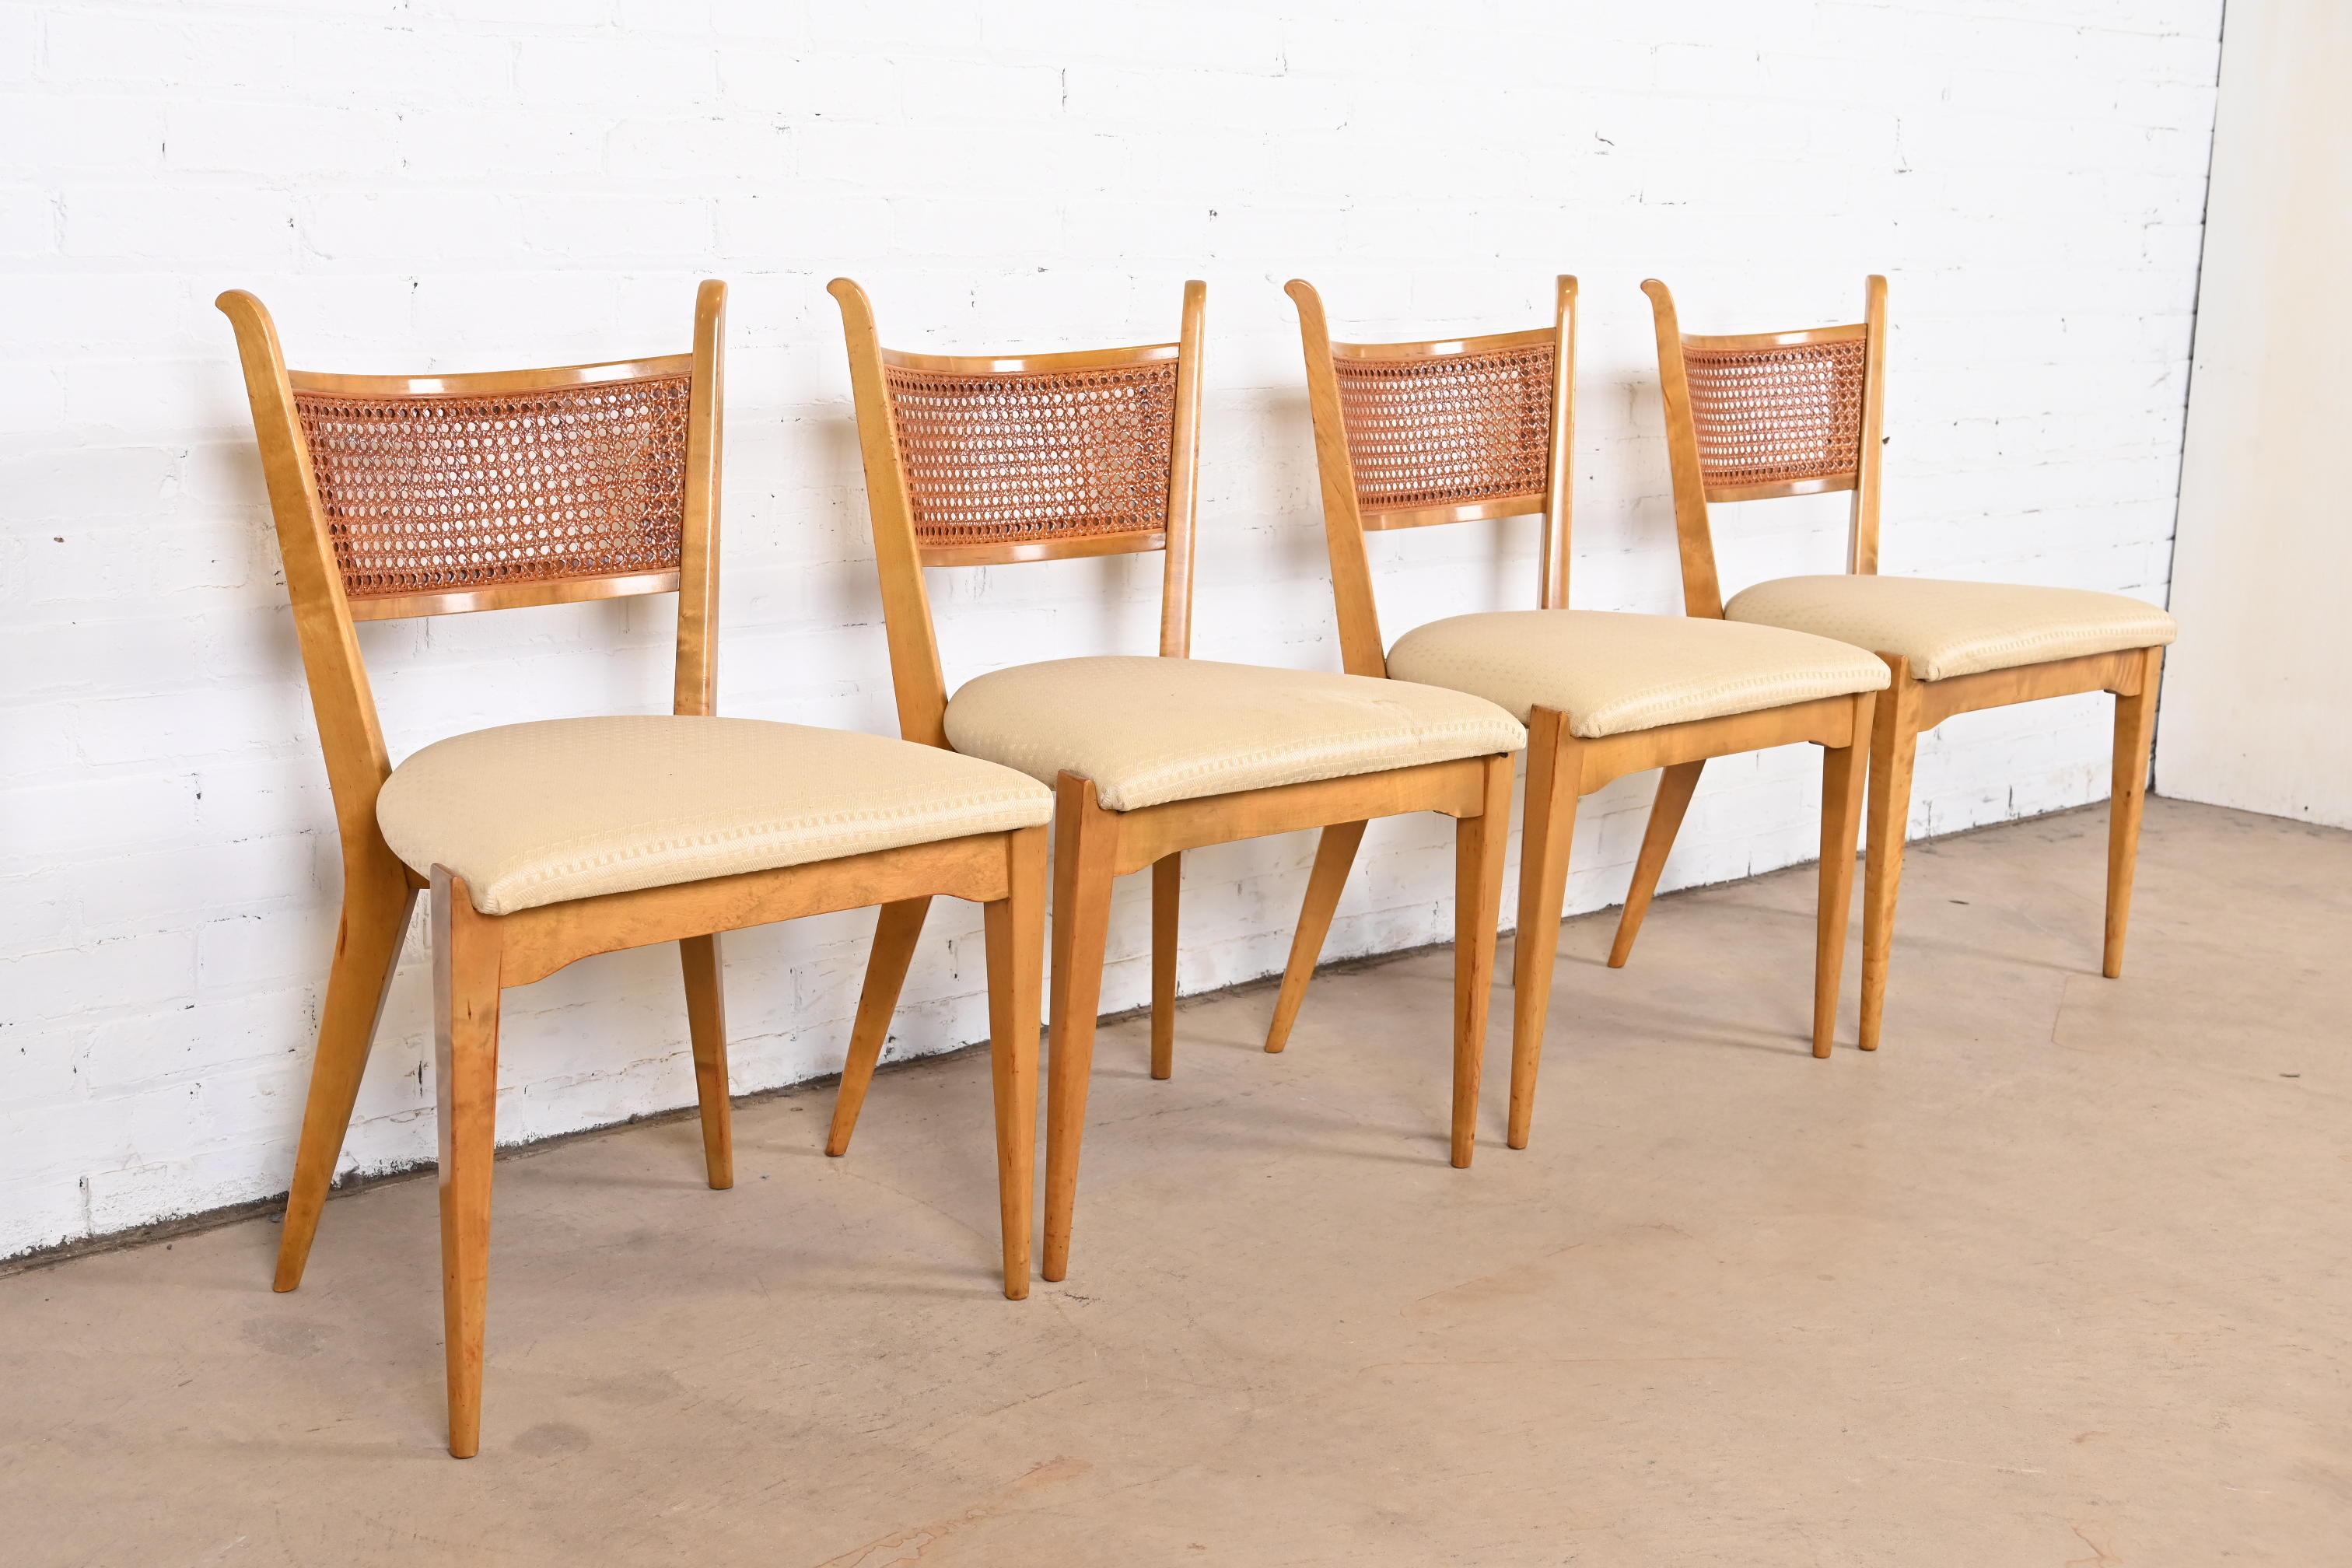 Edmond Spence Swedish Modern Sculpted Maple and Cane Dining Chairs, Set of Four For Sale 1